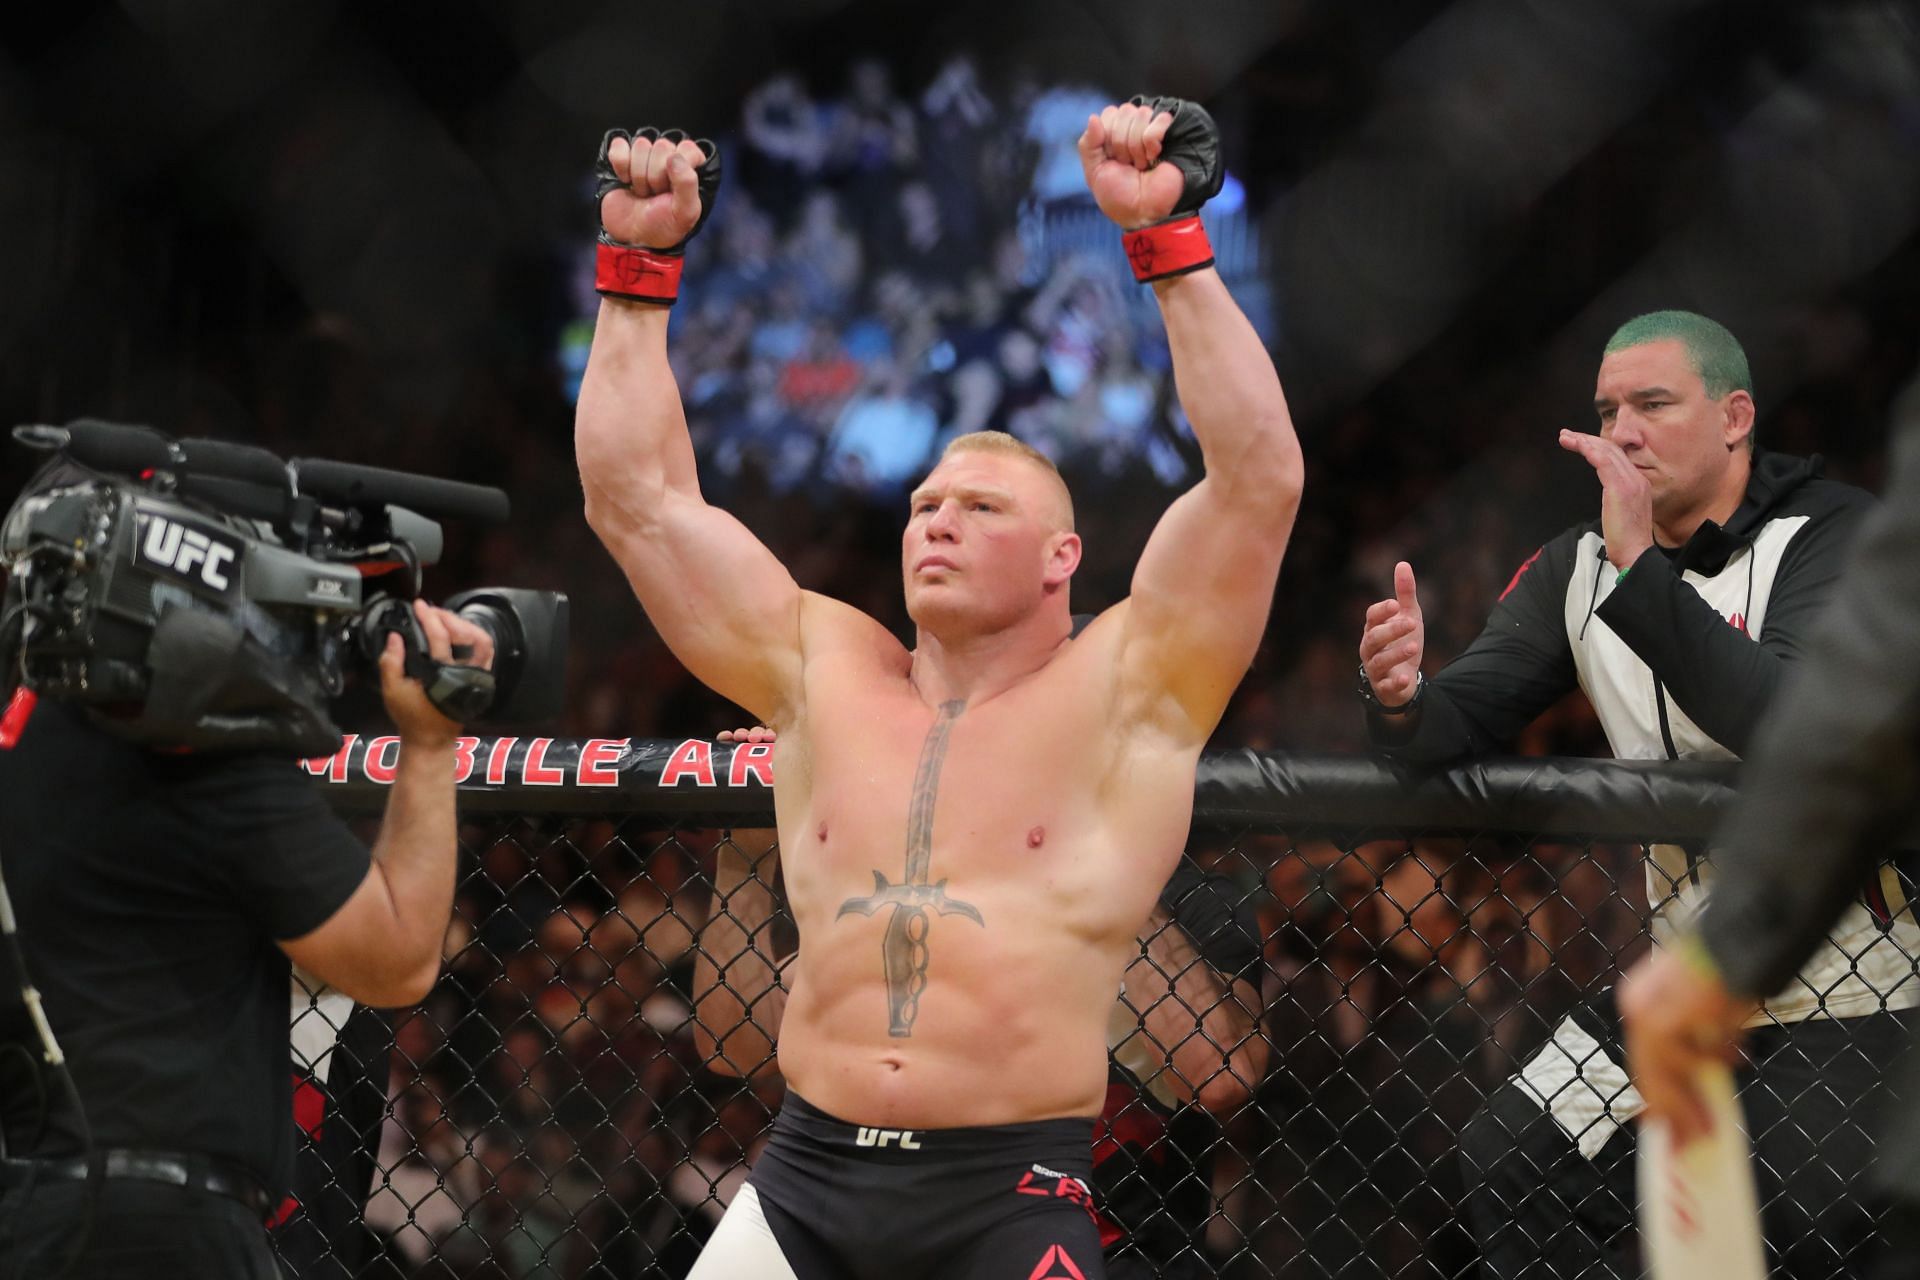 Brock Lesnar only lasted in MMA for a brief time